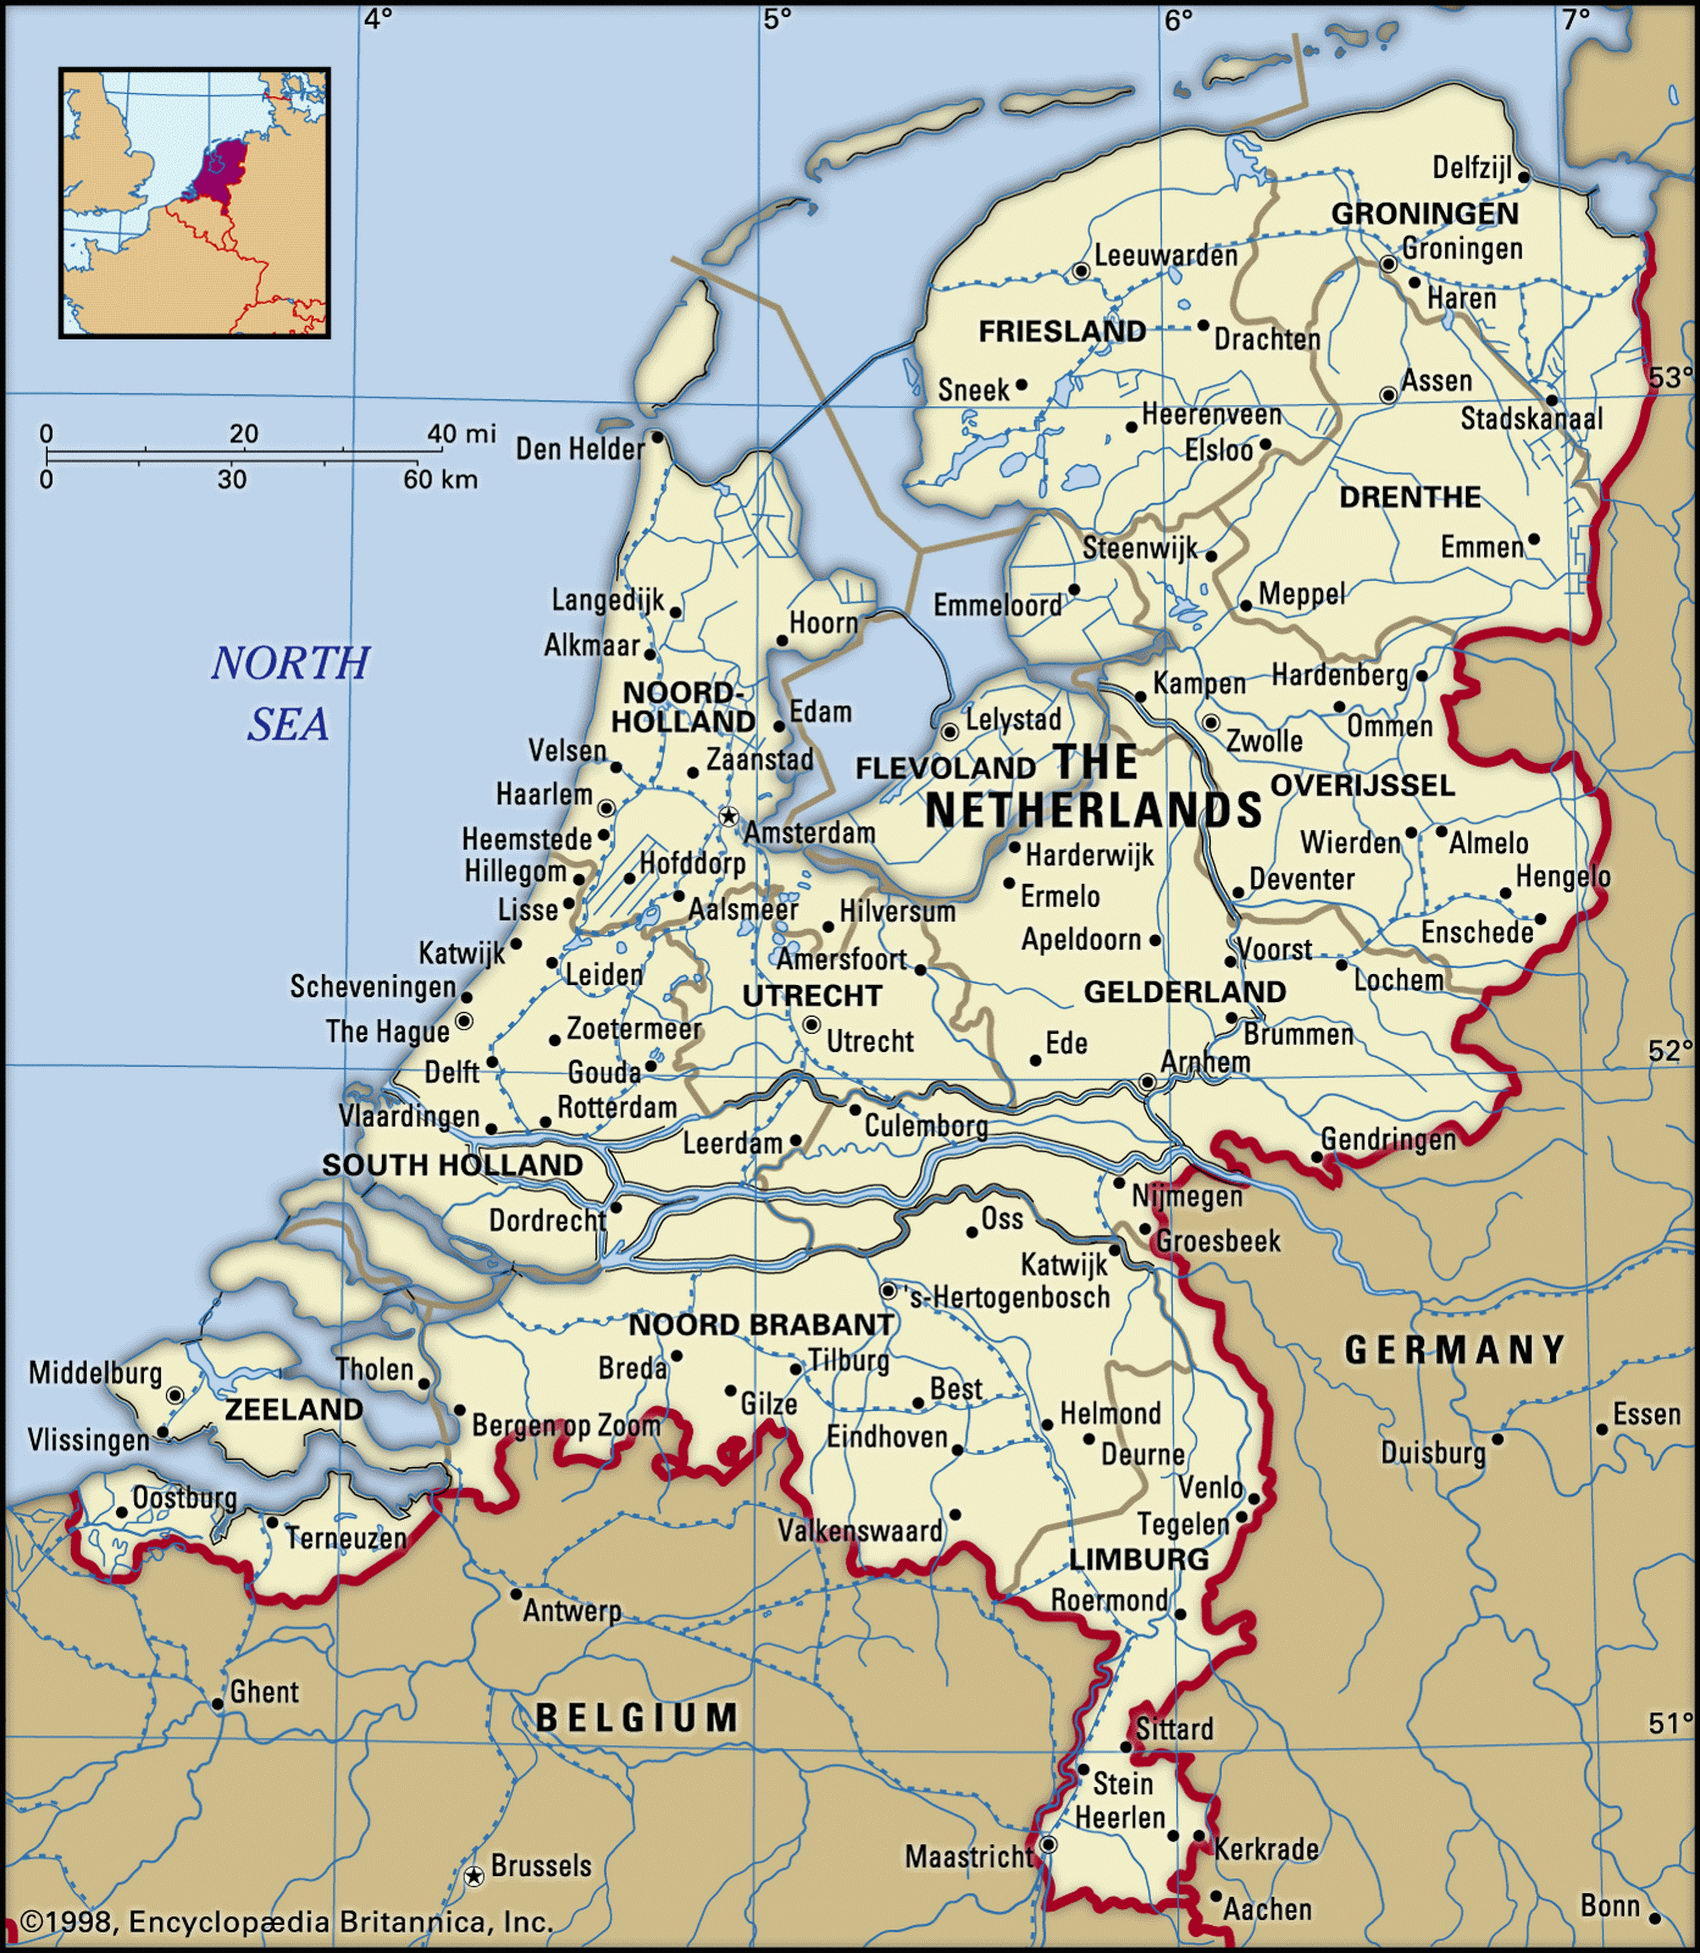 Netherlands geographical facts. Map of Netherlands with cities - World